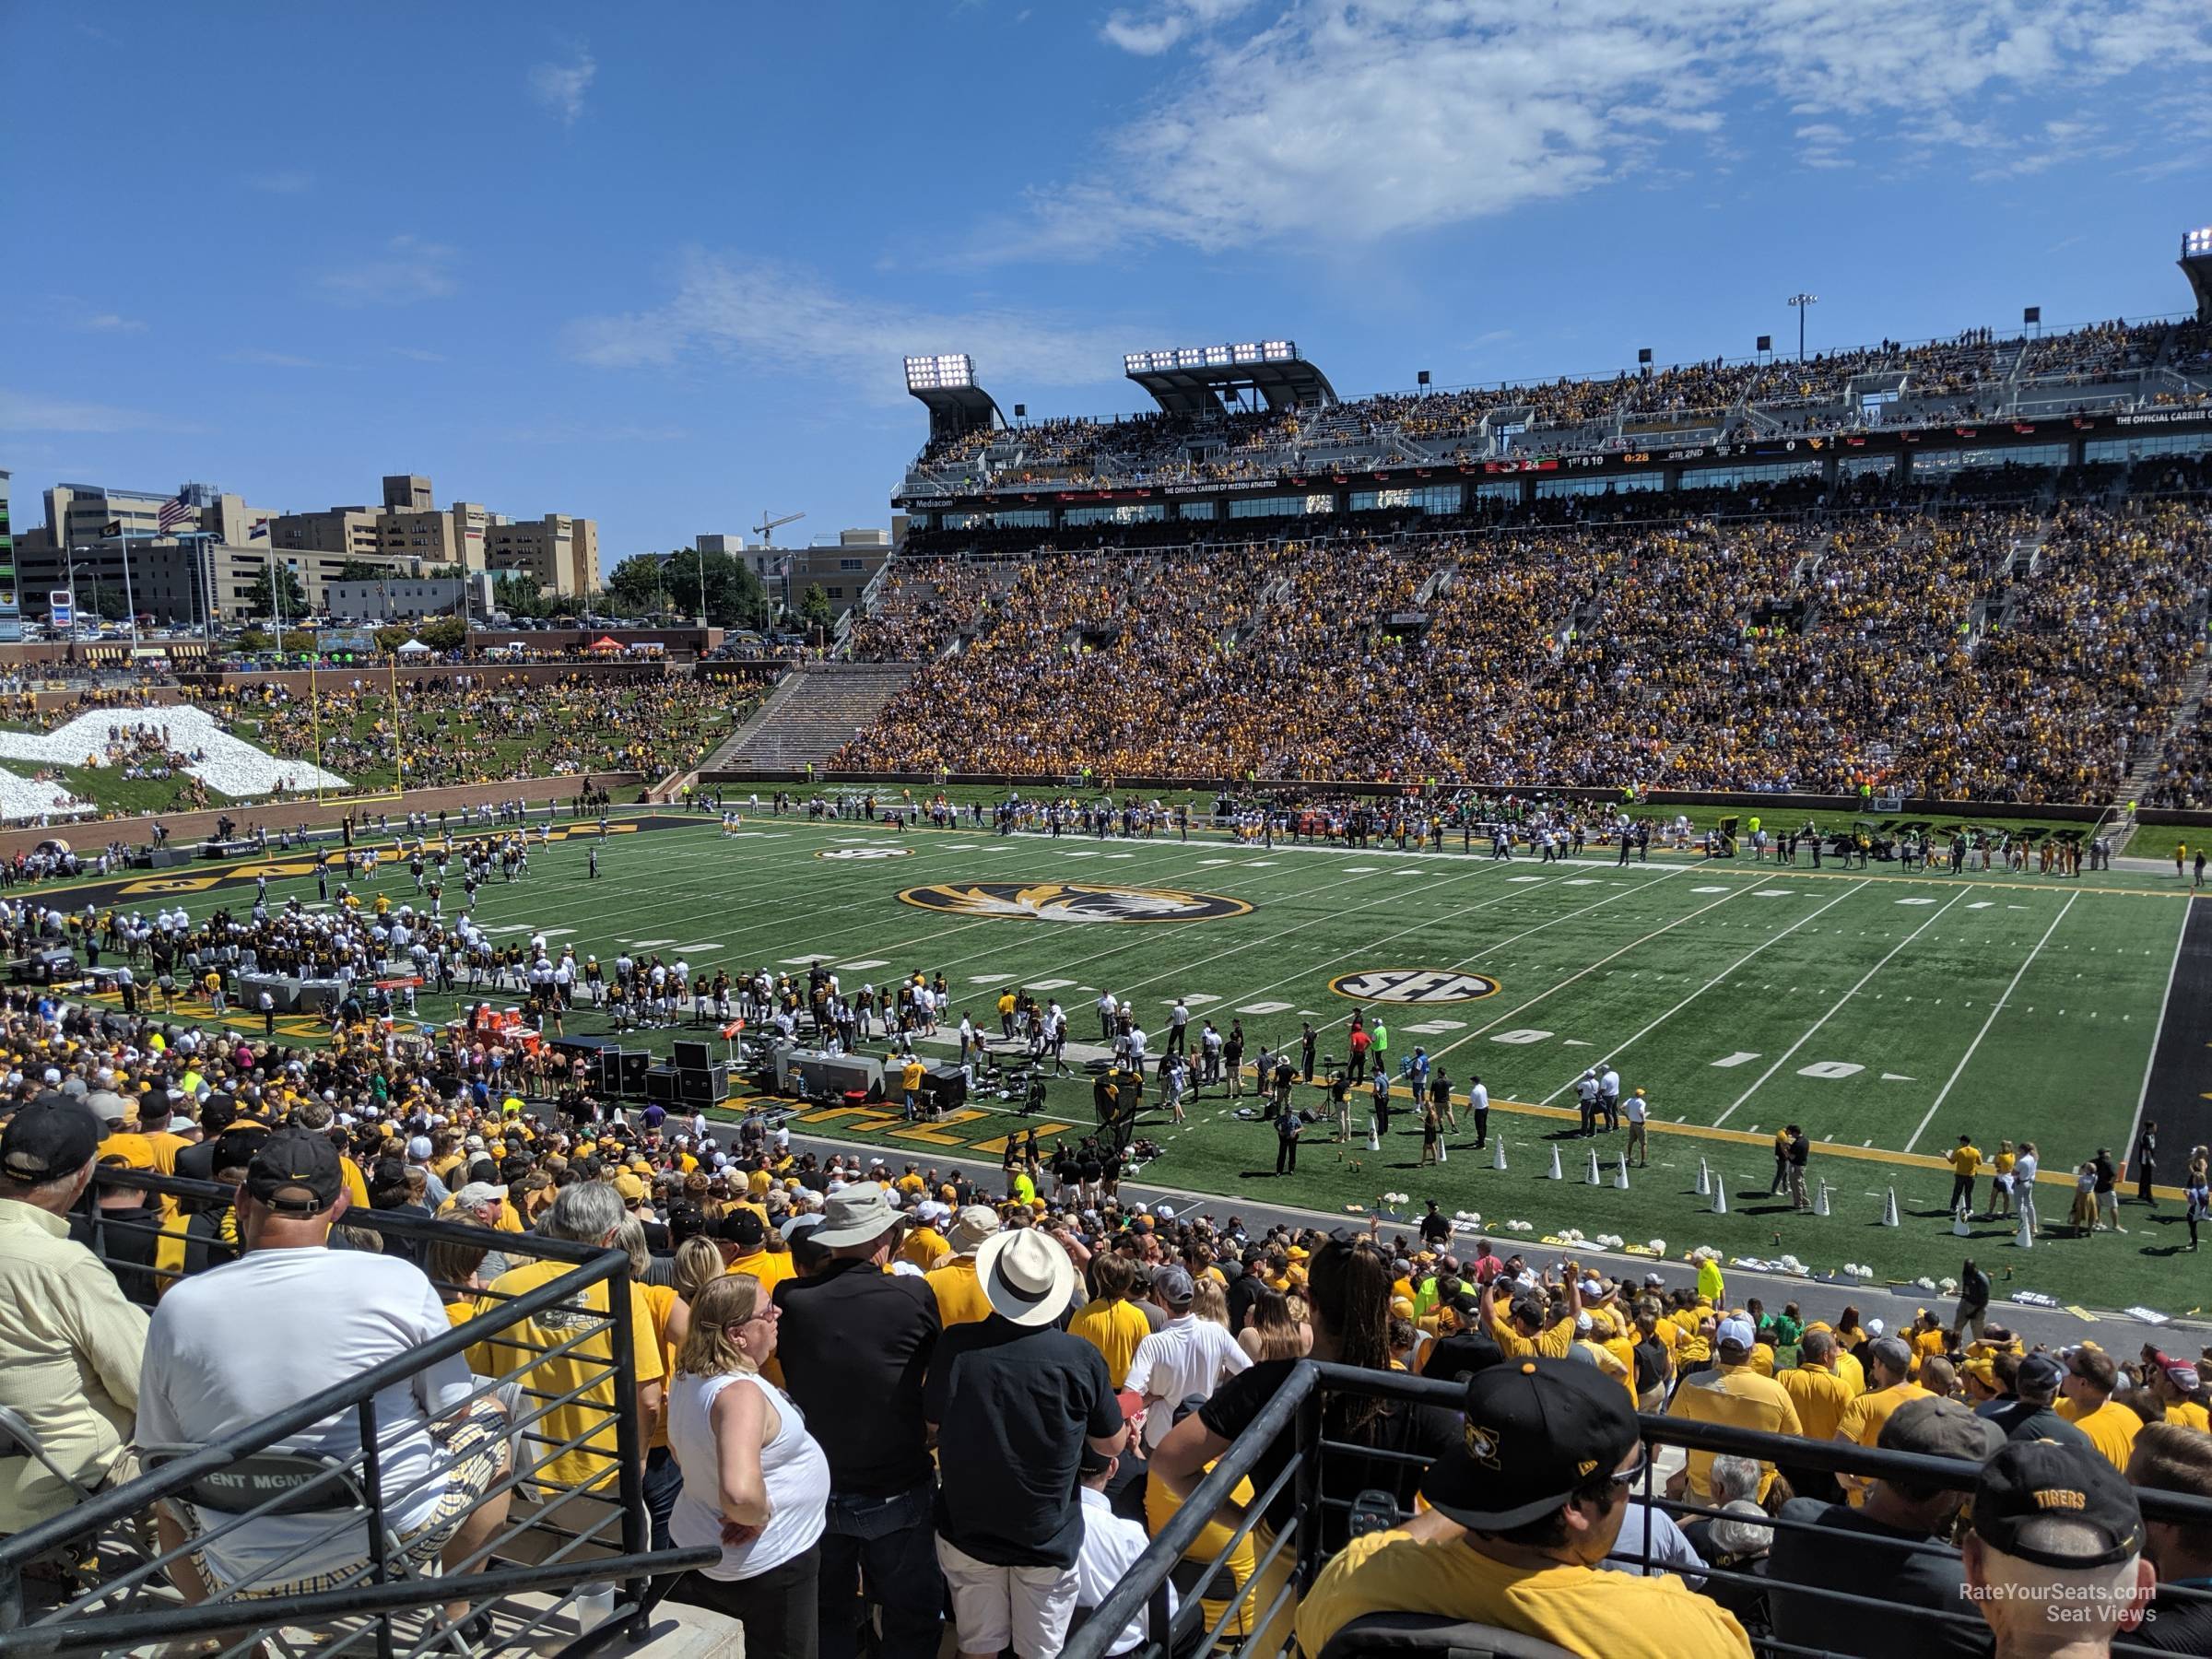 section 124, row 38 seat view  - faurot field